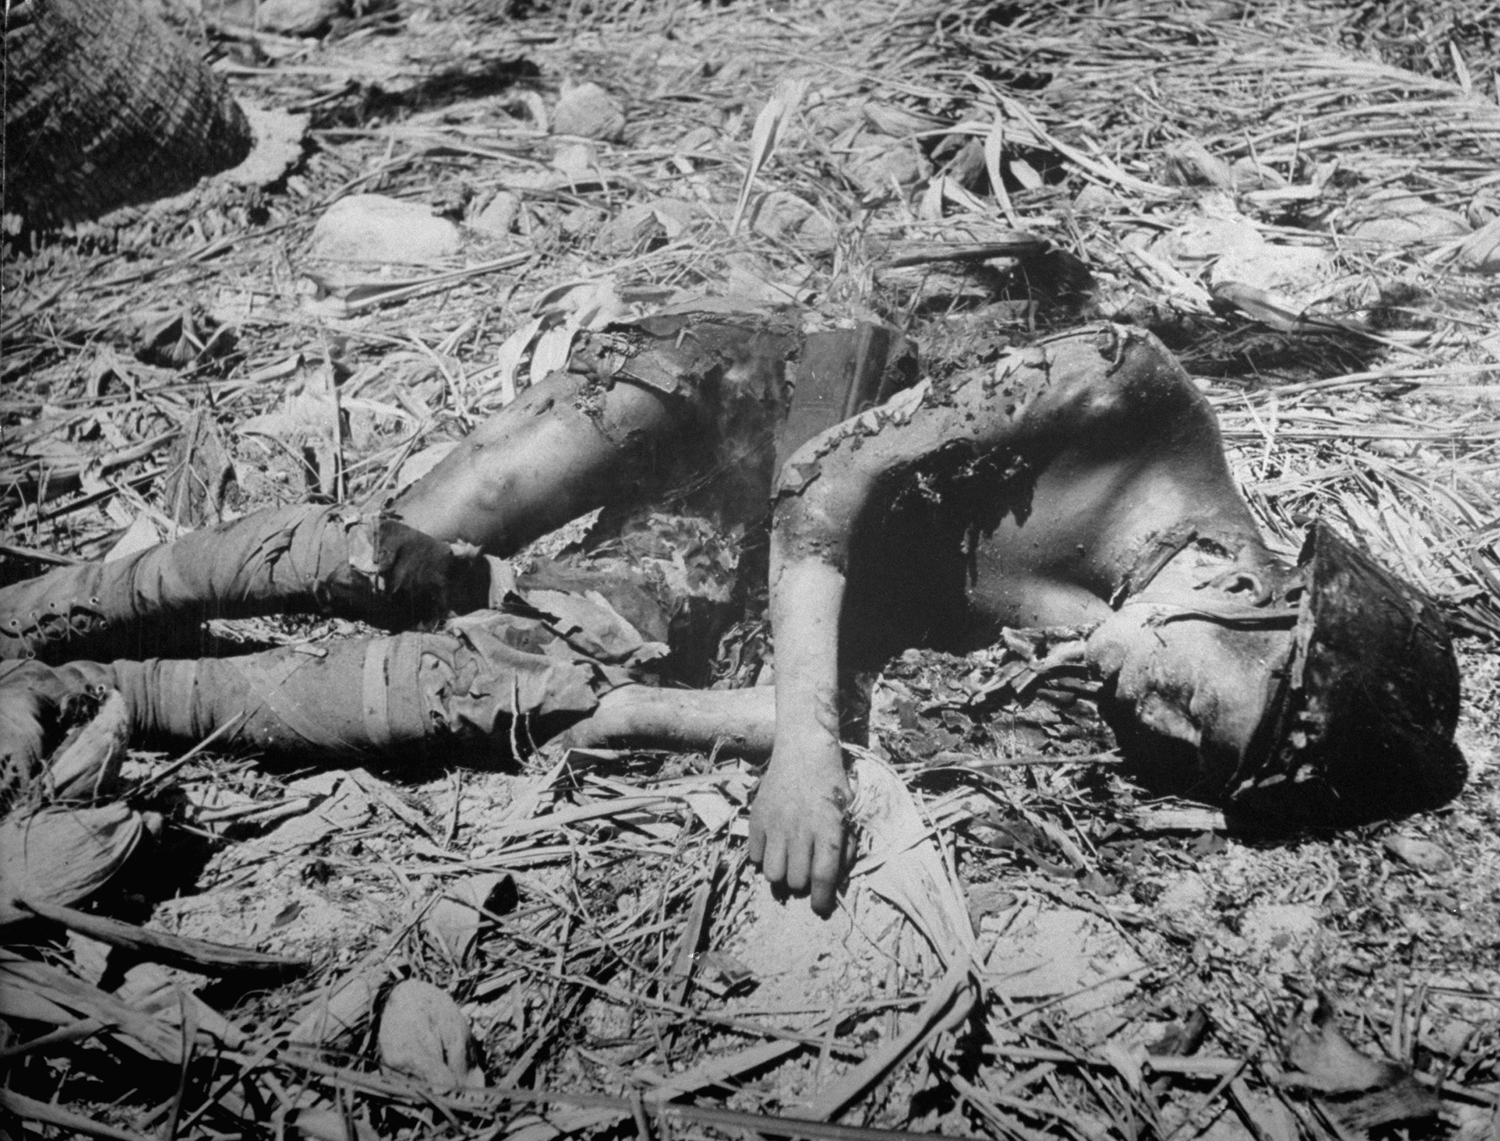 Caption from back of the print of this photograph in the LIFE archives: "Dead Jap [sic] with smoke still rising from his stomach where flamethrower boiled him open."